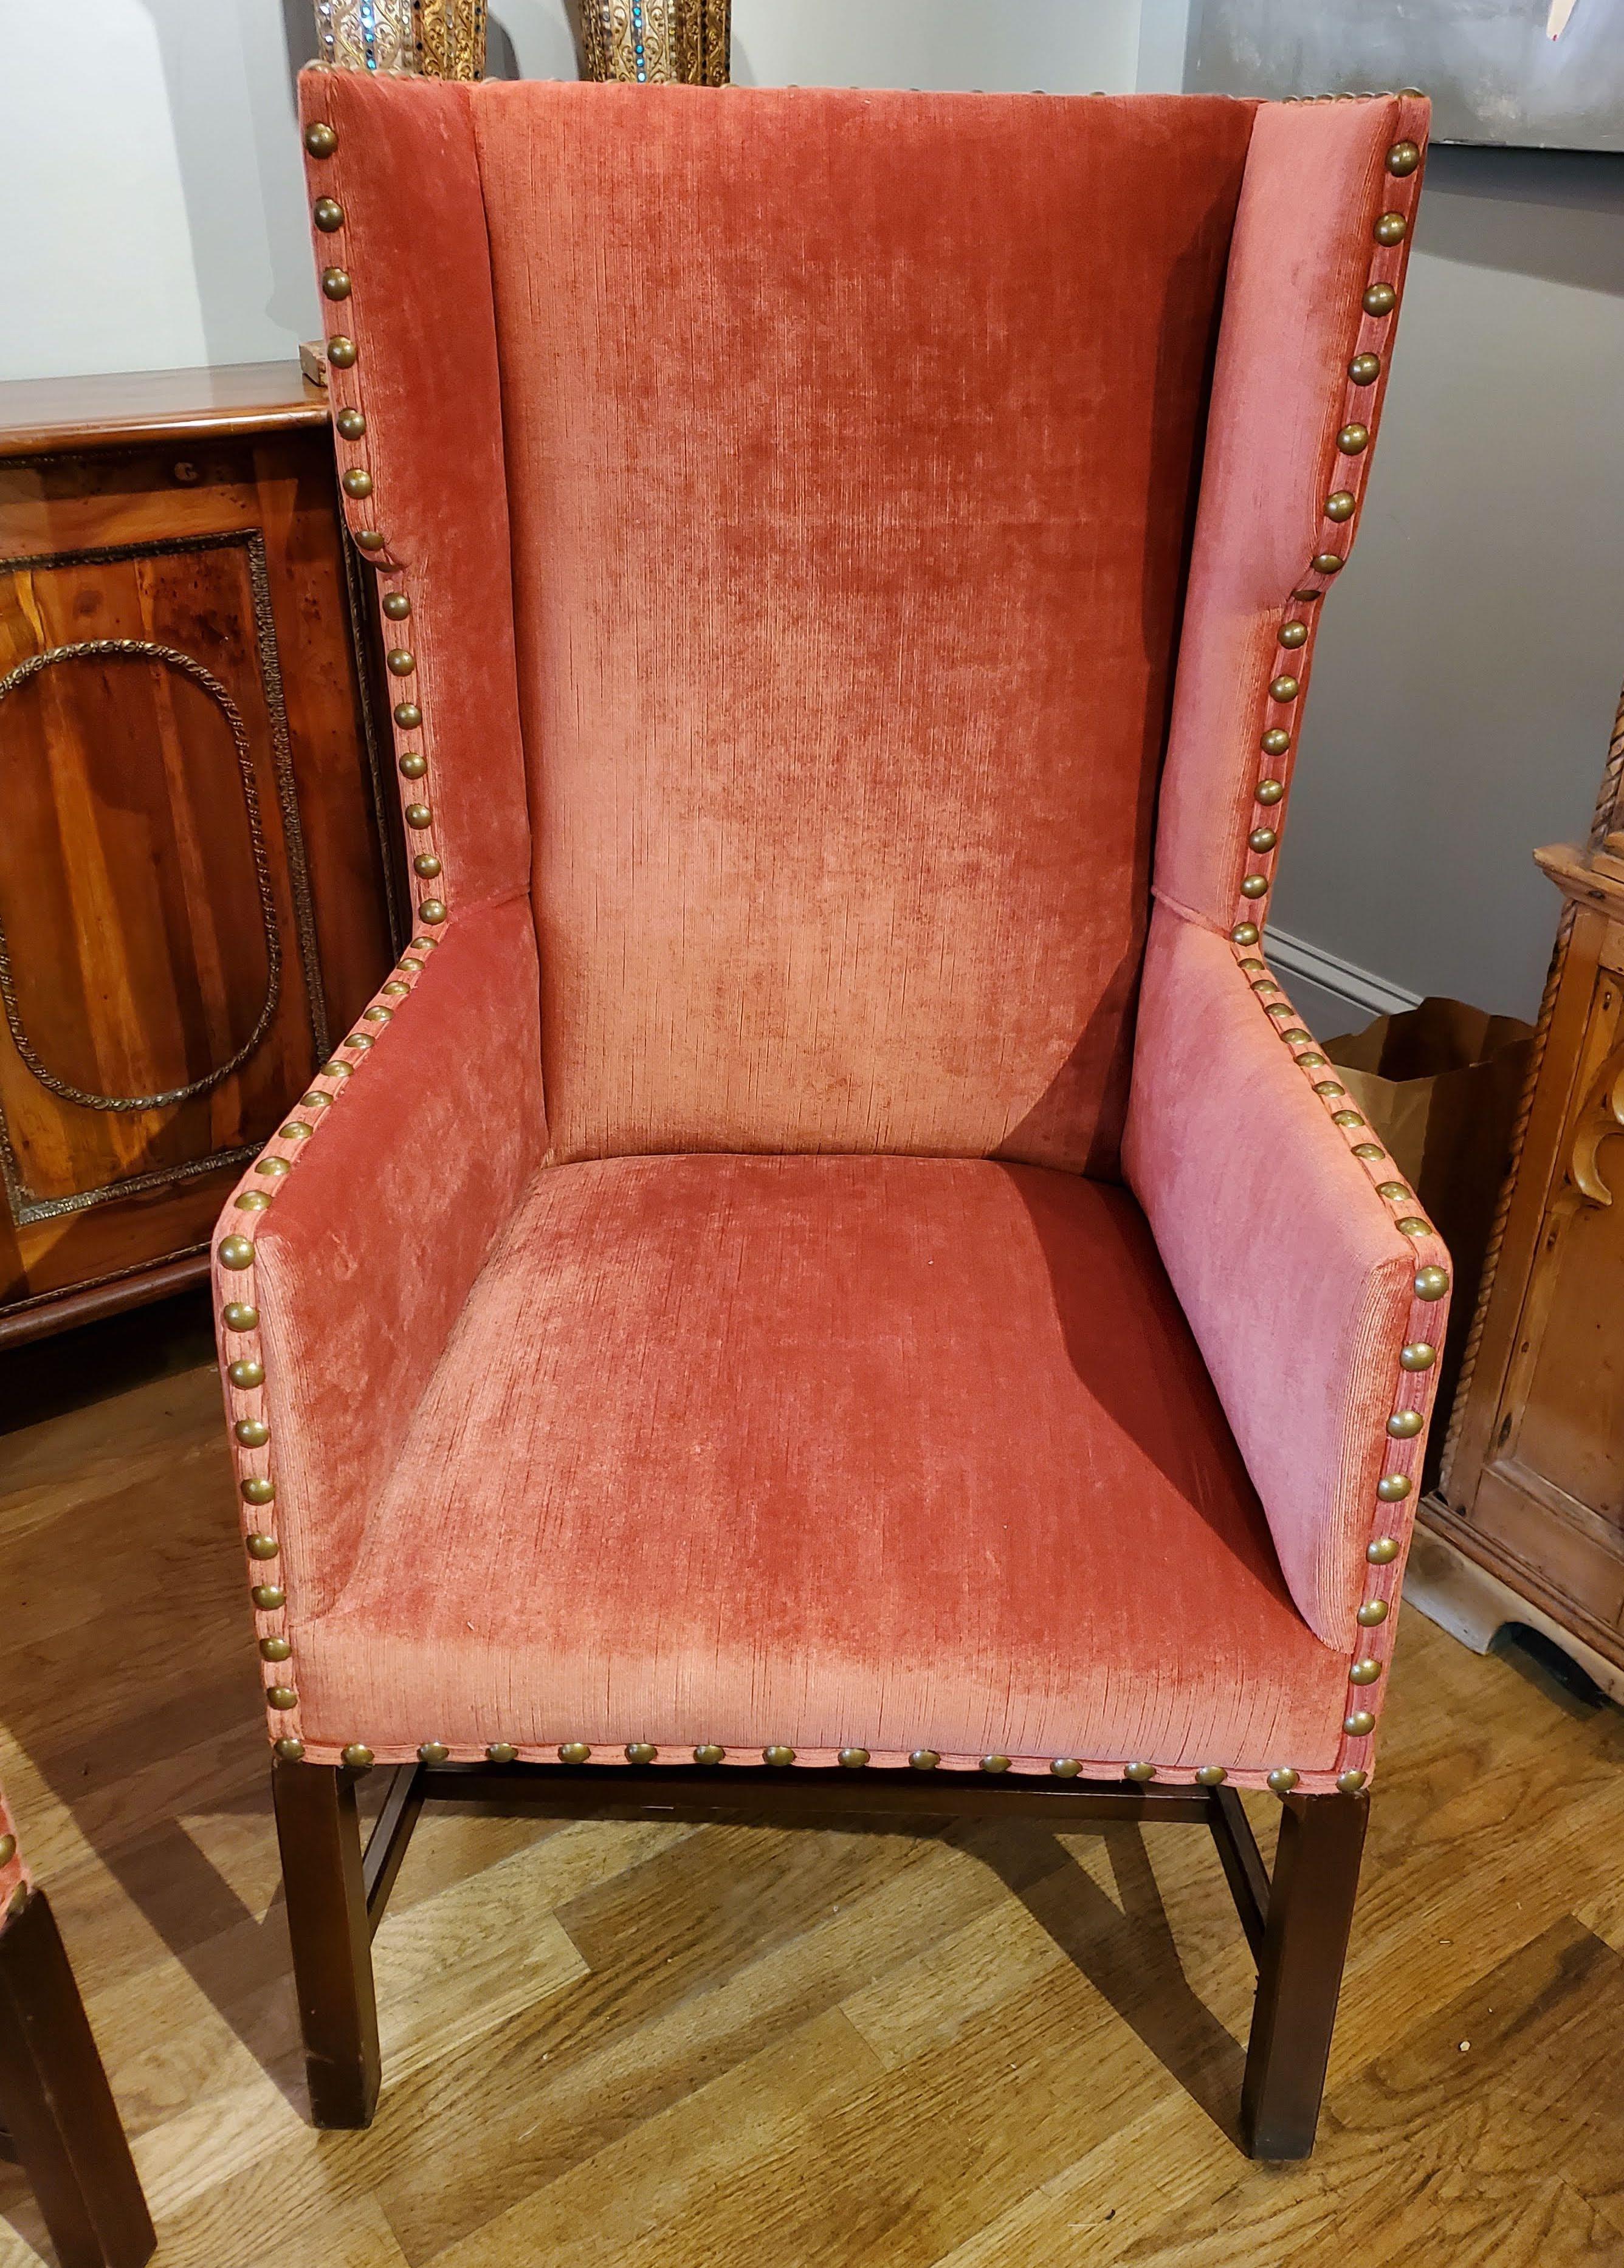 This pair of elegant 19th century English wing chairs are sophisticated, classy and comfortable. Upholstered in persimmon colored velvet with large brass nailhead decoration over mahogany legs and stretchers make for a beautiful addition to your